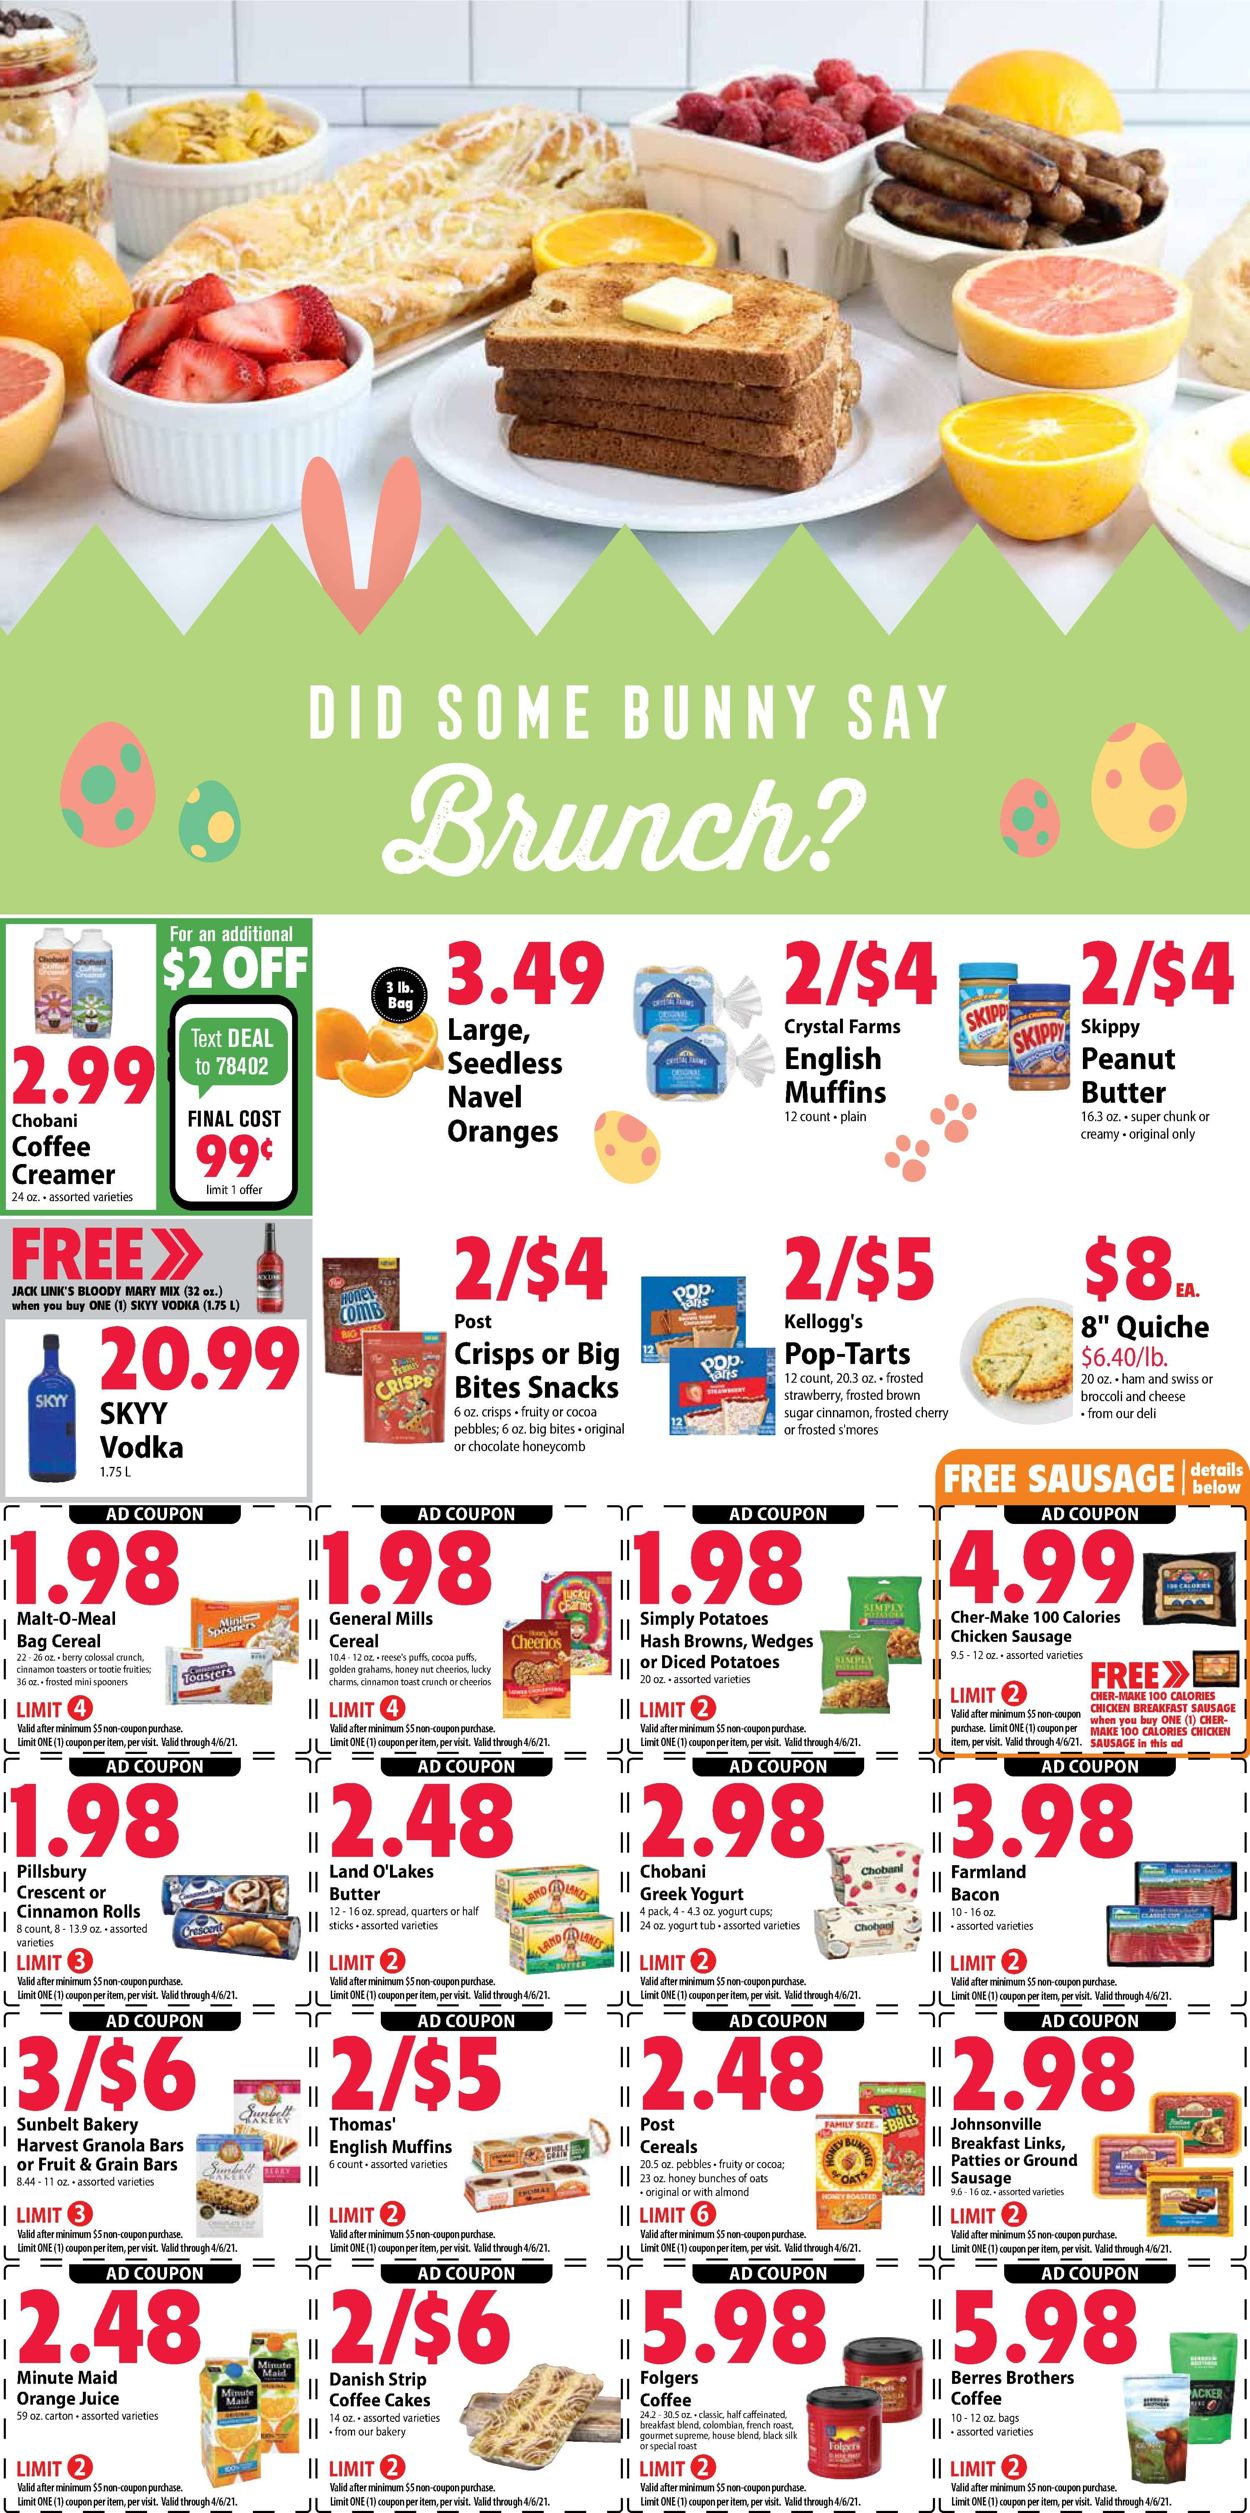 Festival Foods Easter 2021 ad Weekly Ad Circular - valid 03/31-04/06/2021 (Page 6)